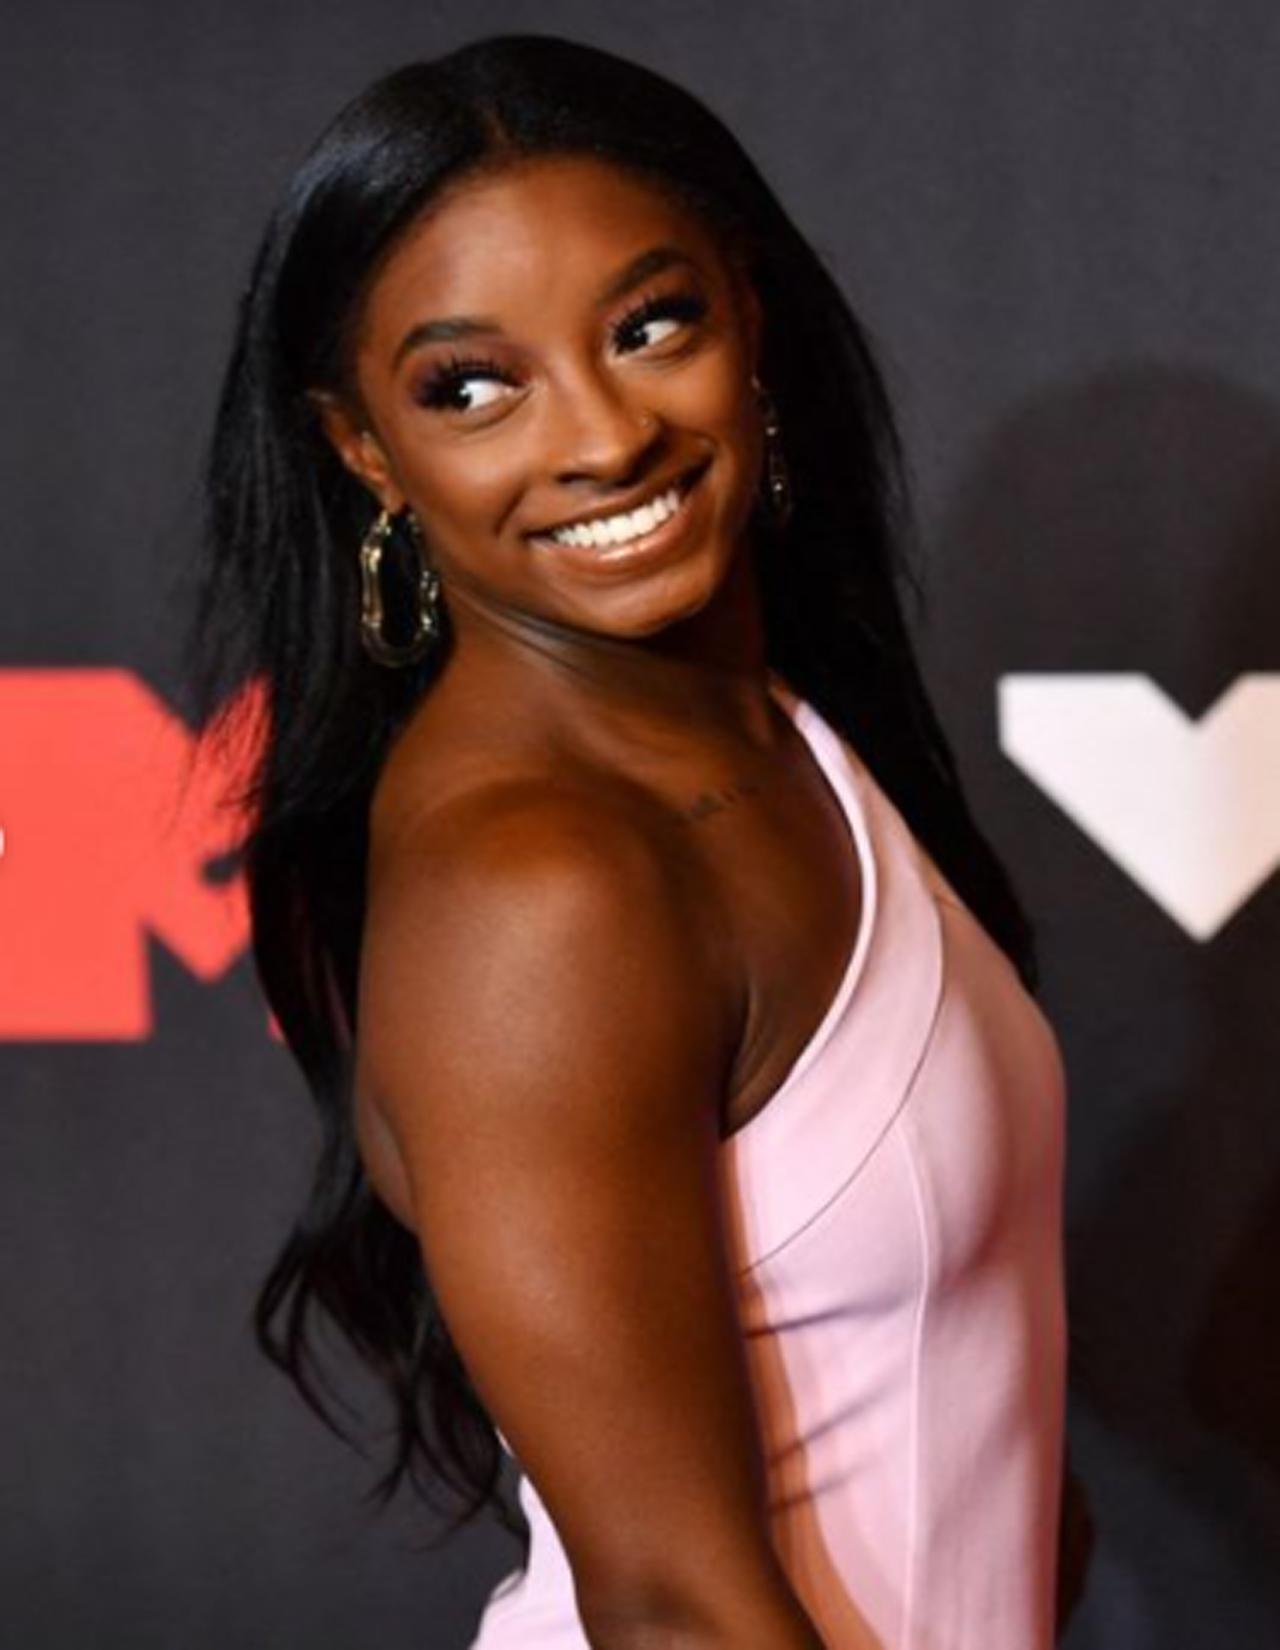 Simone Biles is a 5-time all-round World Champion (2013–2015, 2018–19), a 5-time World floor exercise champion (2013–2015, 2018–19), a 3-time World balance beam champion (2014–15, 2019), two-time World vault champion (2018–19), and a 6-time United States national all-around champion (2013–2016, 2018–19).